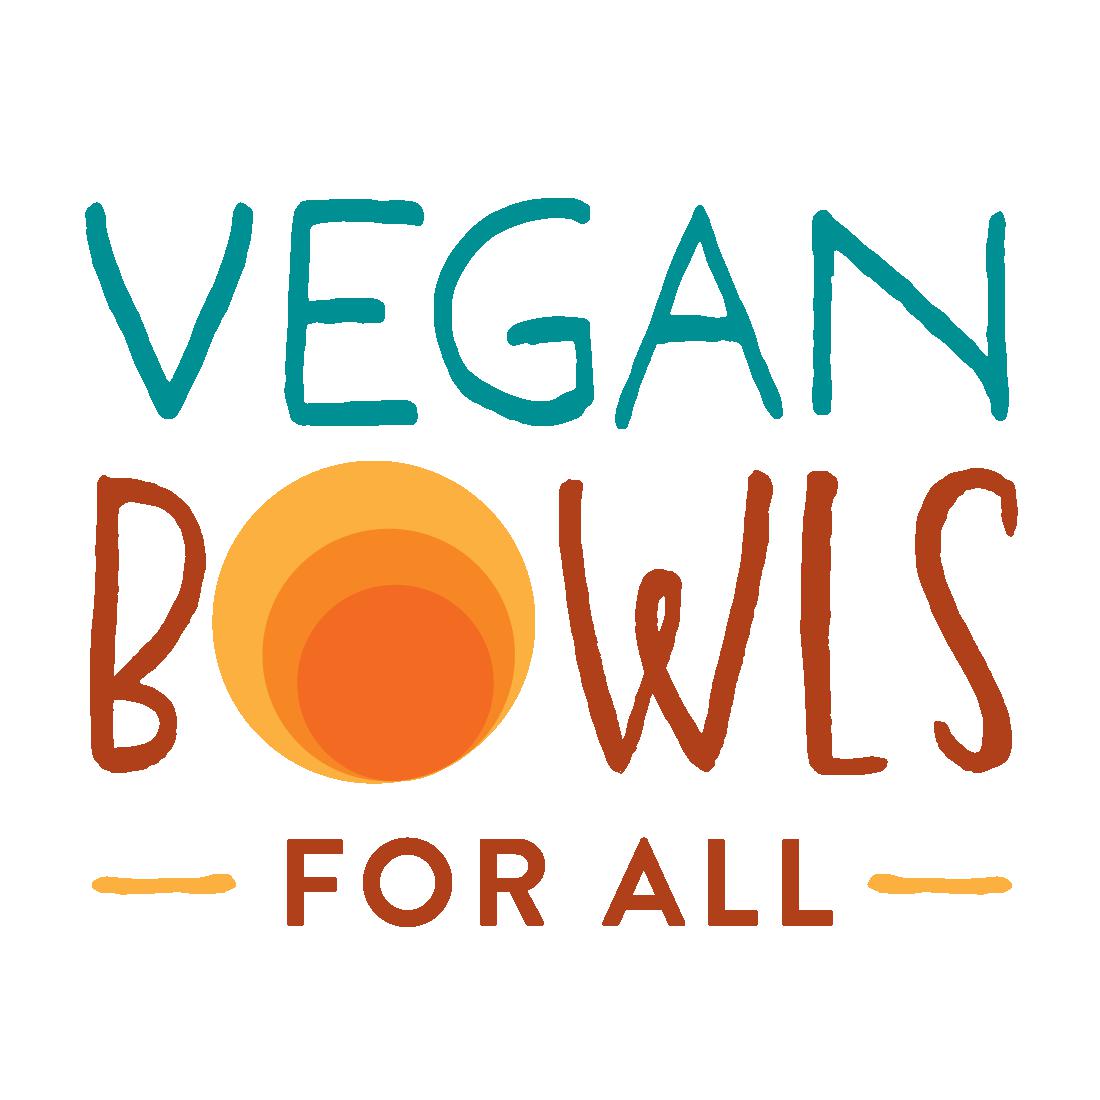 Vegan Bowls For All - The Dome